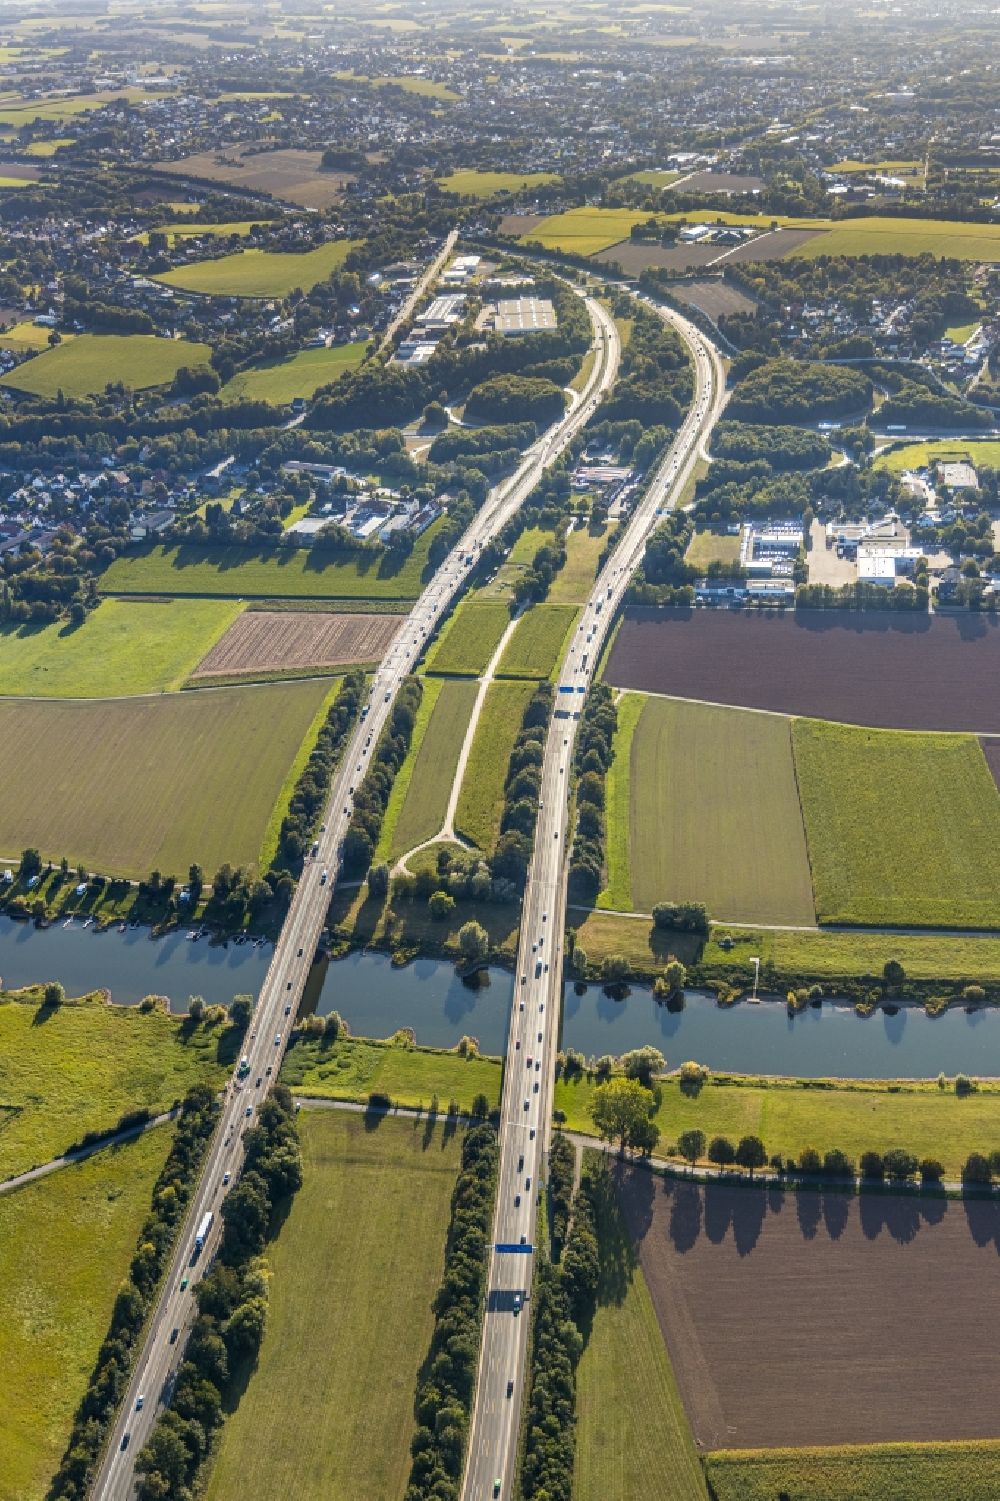 Bad Oeynhausen from above - Routing and traffic lanes over the highway bridge in the motorway A 2 over the river course of the Weser in Bad Oeynhausen in the state North Rhine-Westphalia, Germany